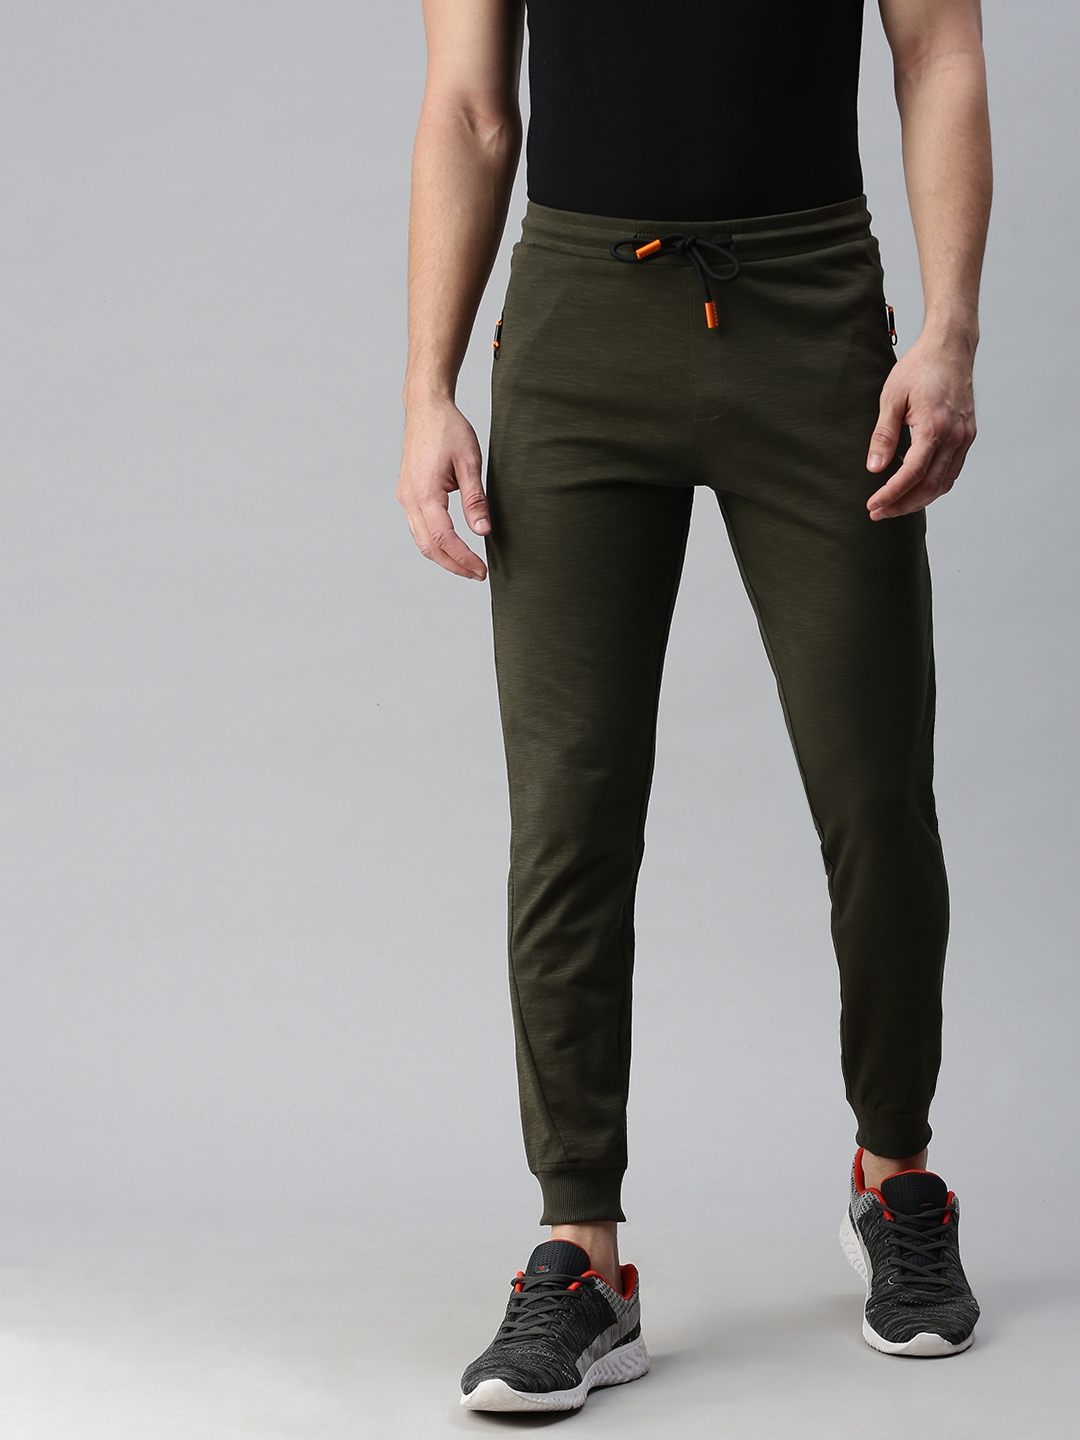 GBH Mens Slim-Fit Cotton Twill Jogger Pants 2-Pack India | Ubuy